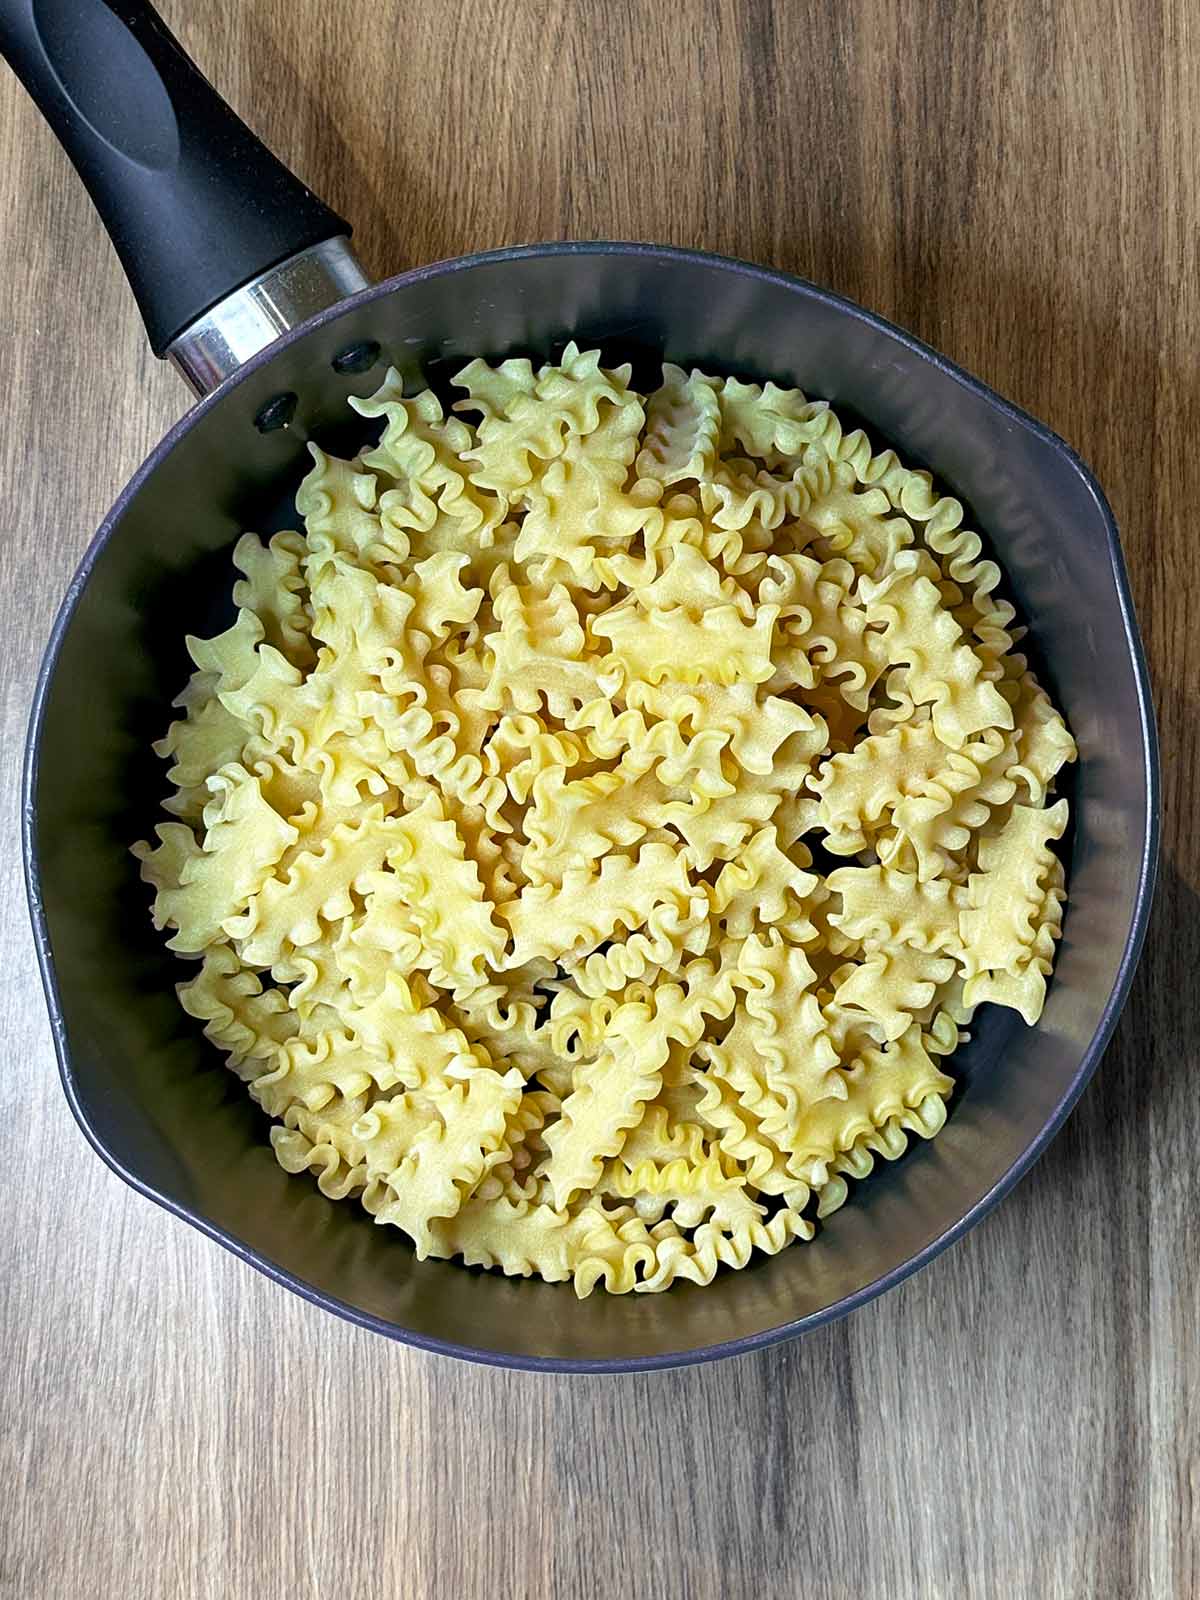 A saucepan with pasta in it.